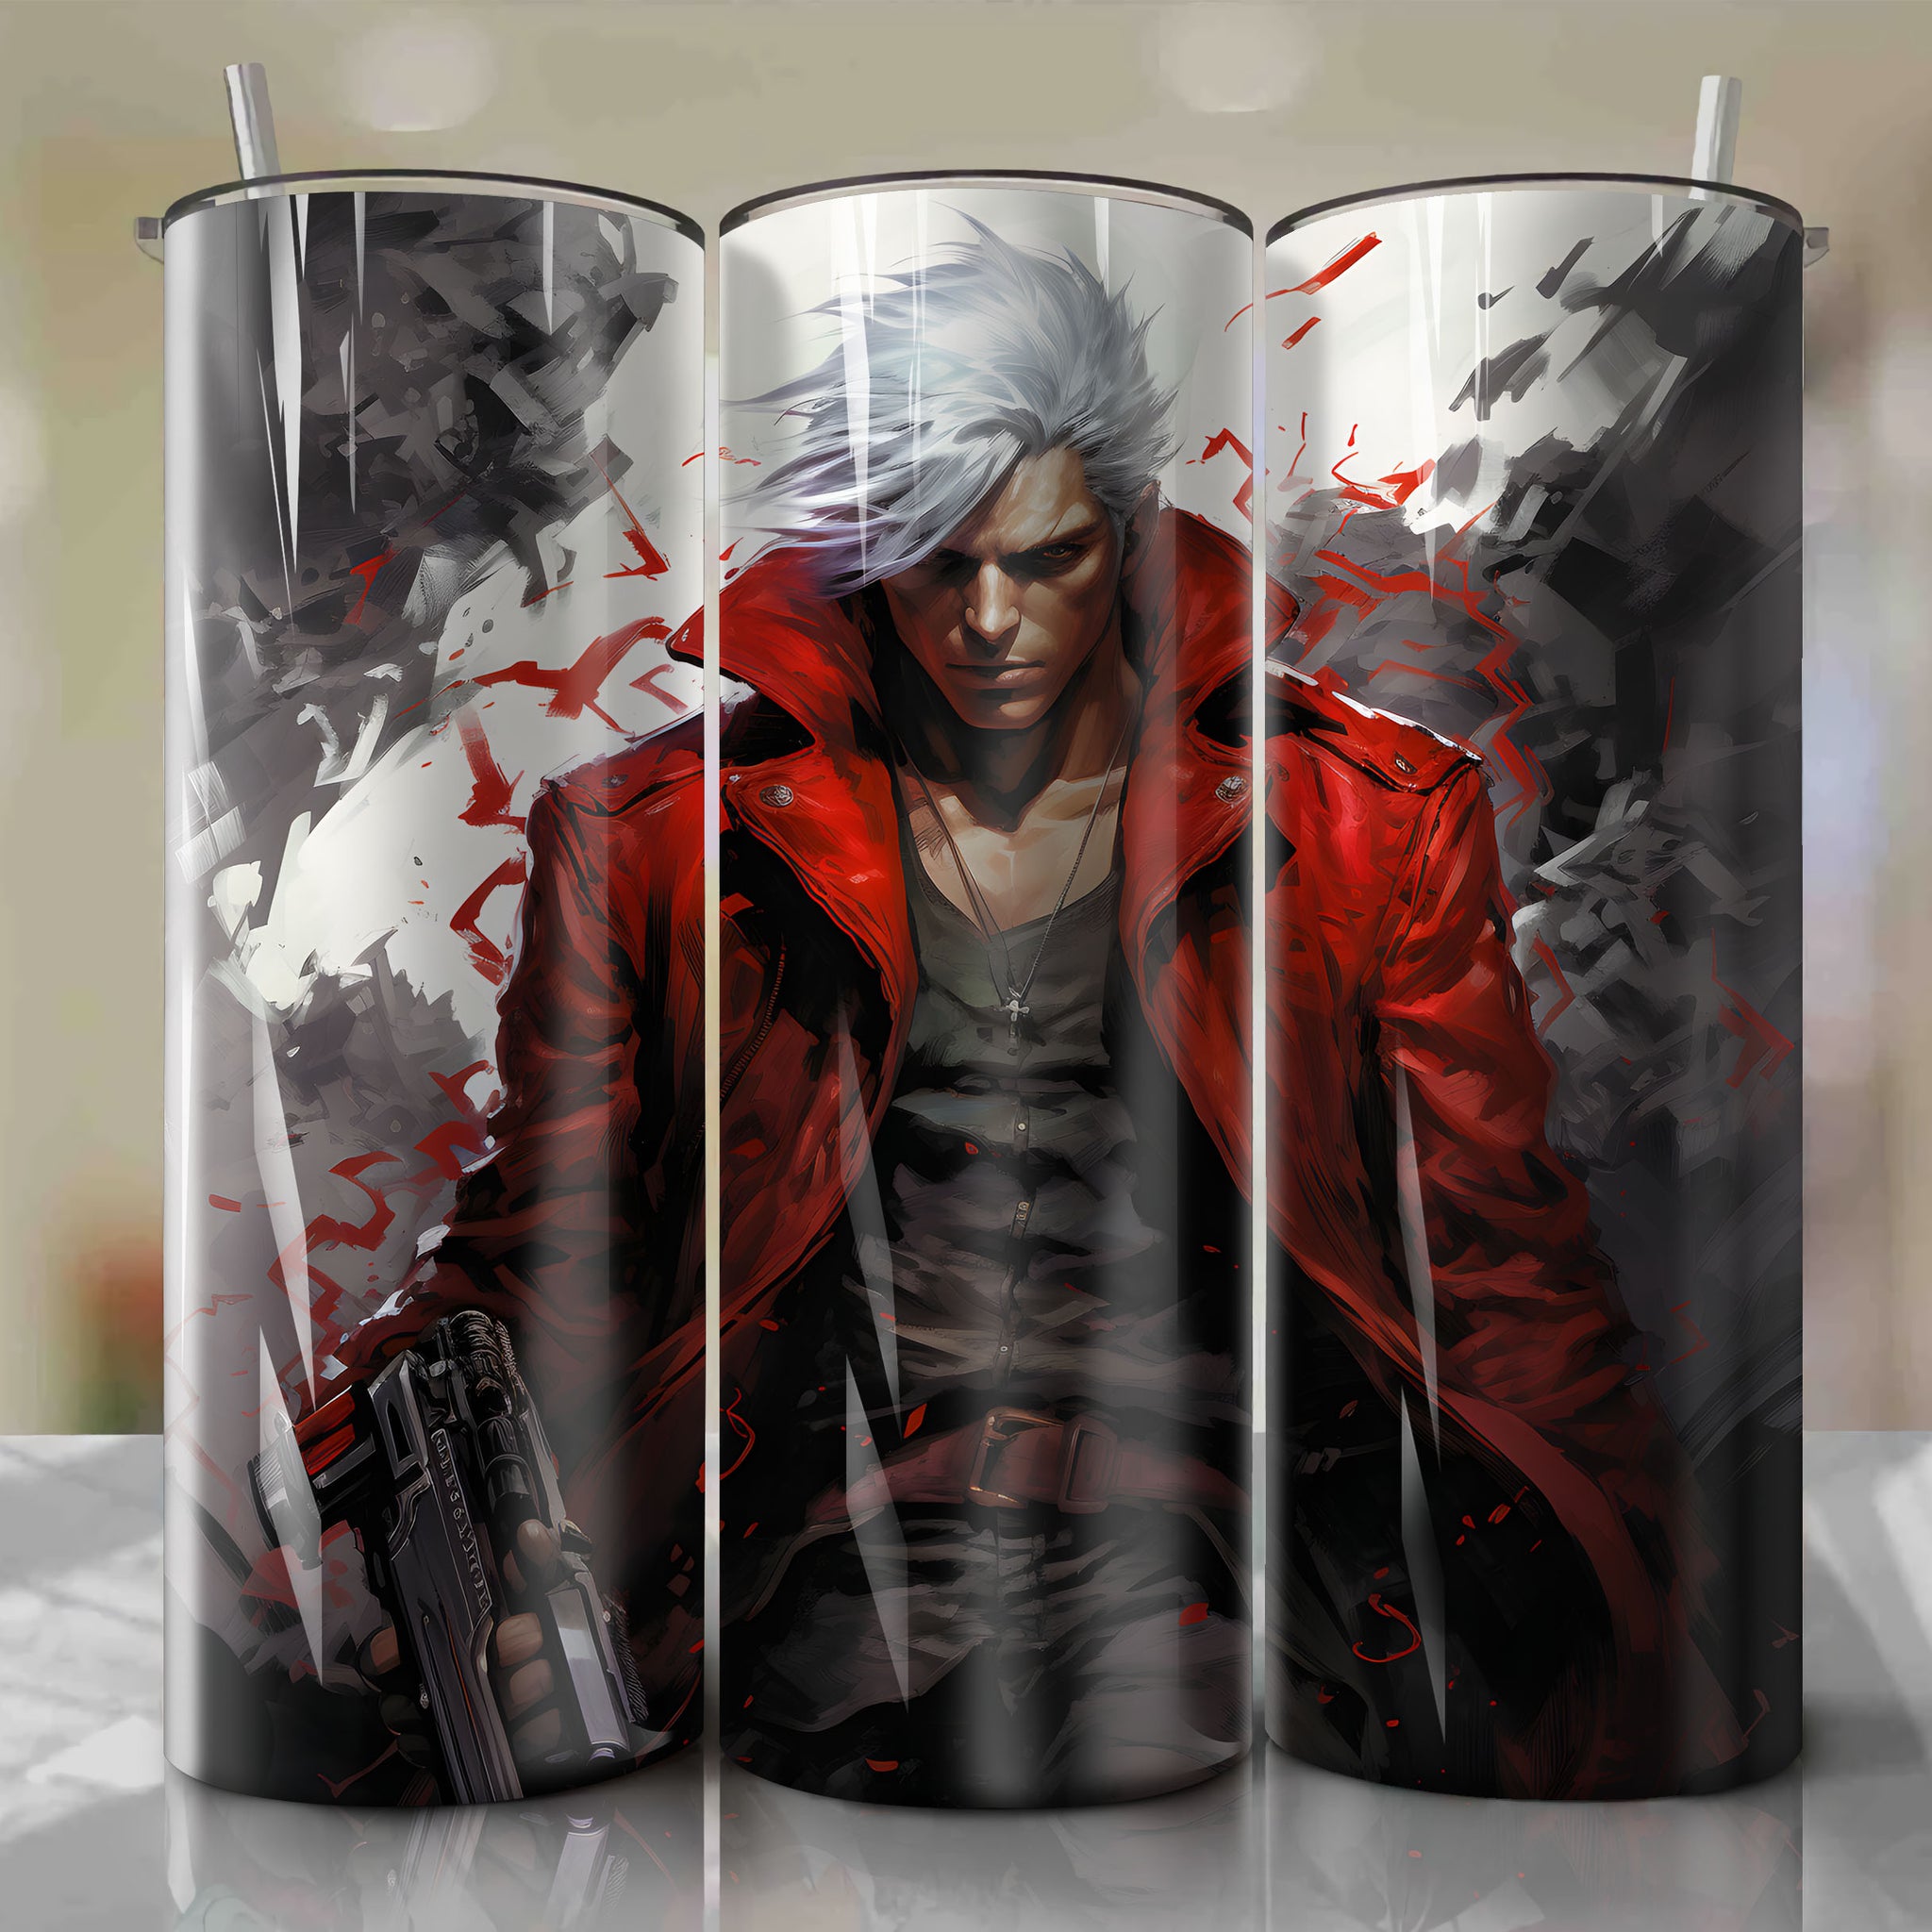 20 Oz Tumbler Wrap - A Stylish Badass Digital Painting for Dante, the Demon Hunter from Devil May Cry
